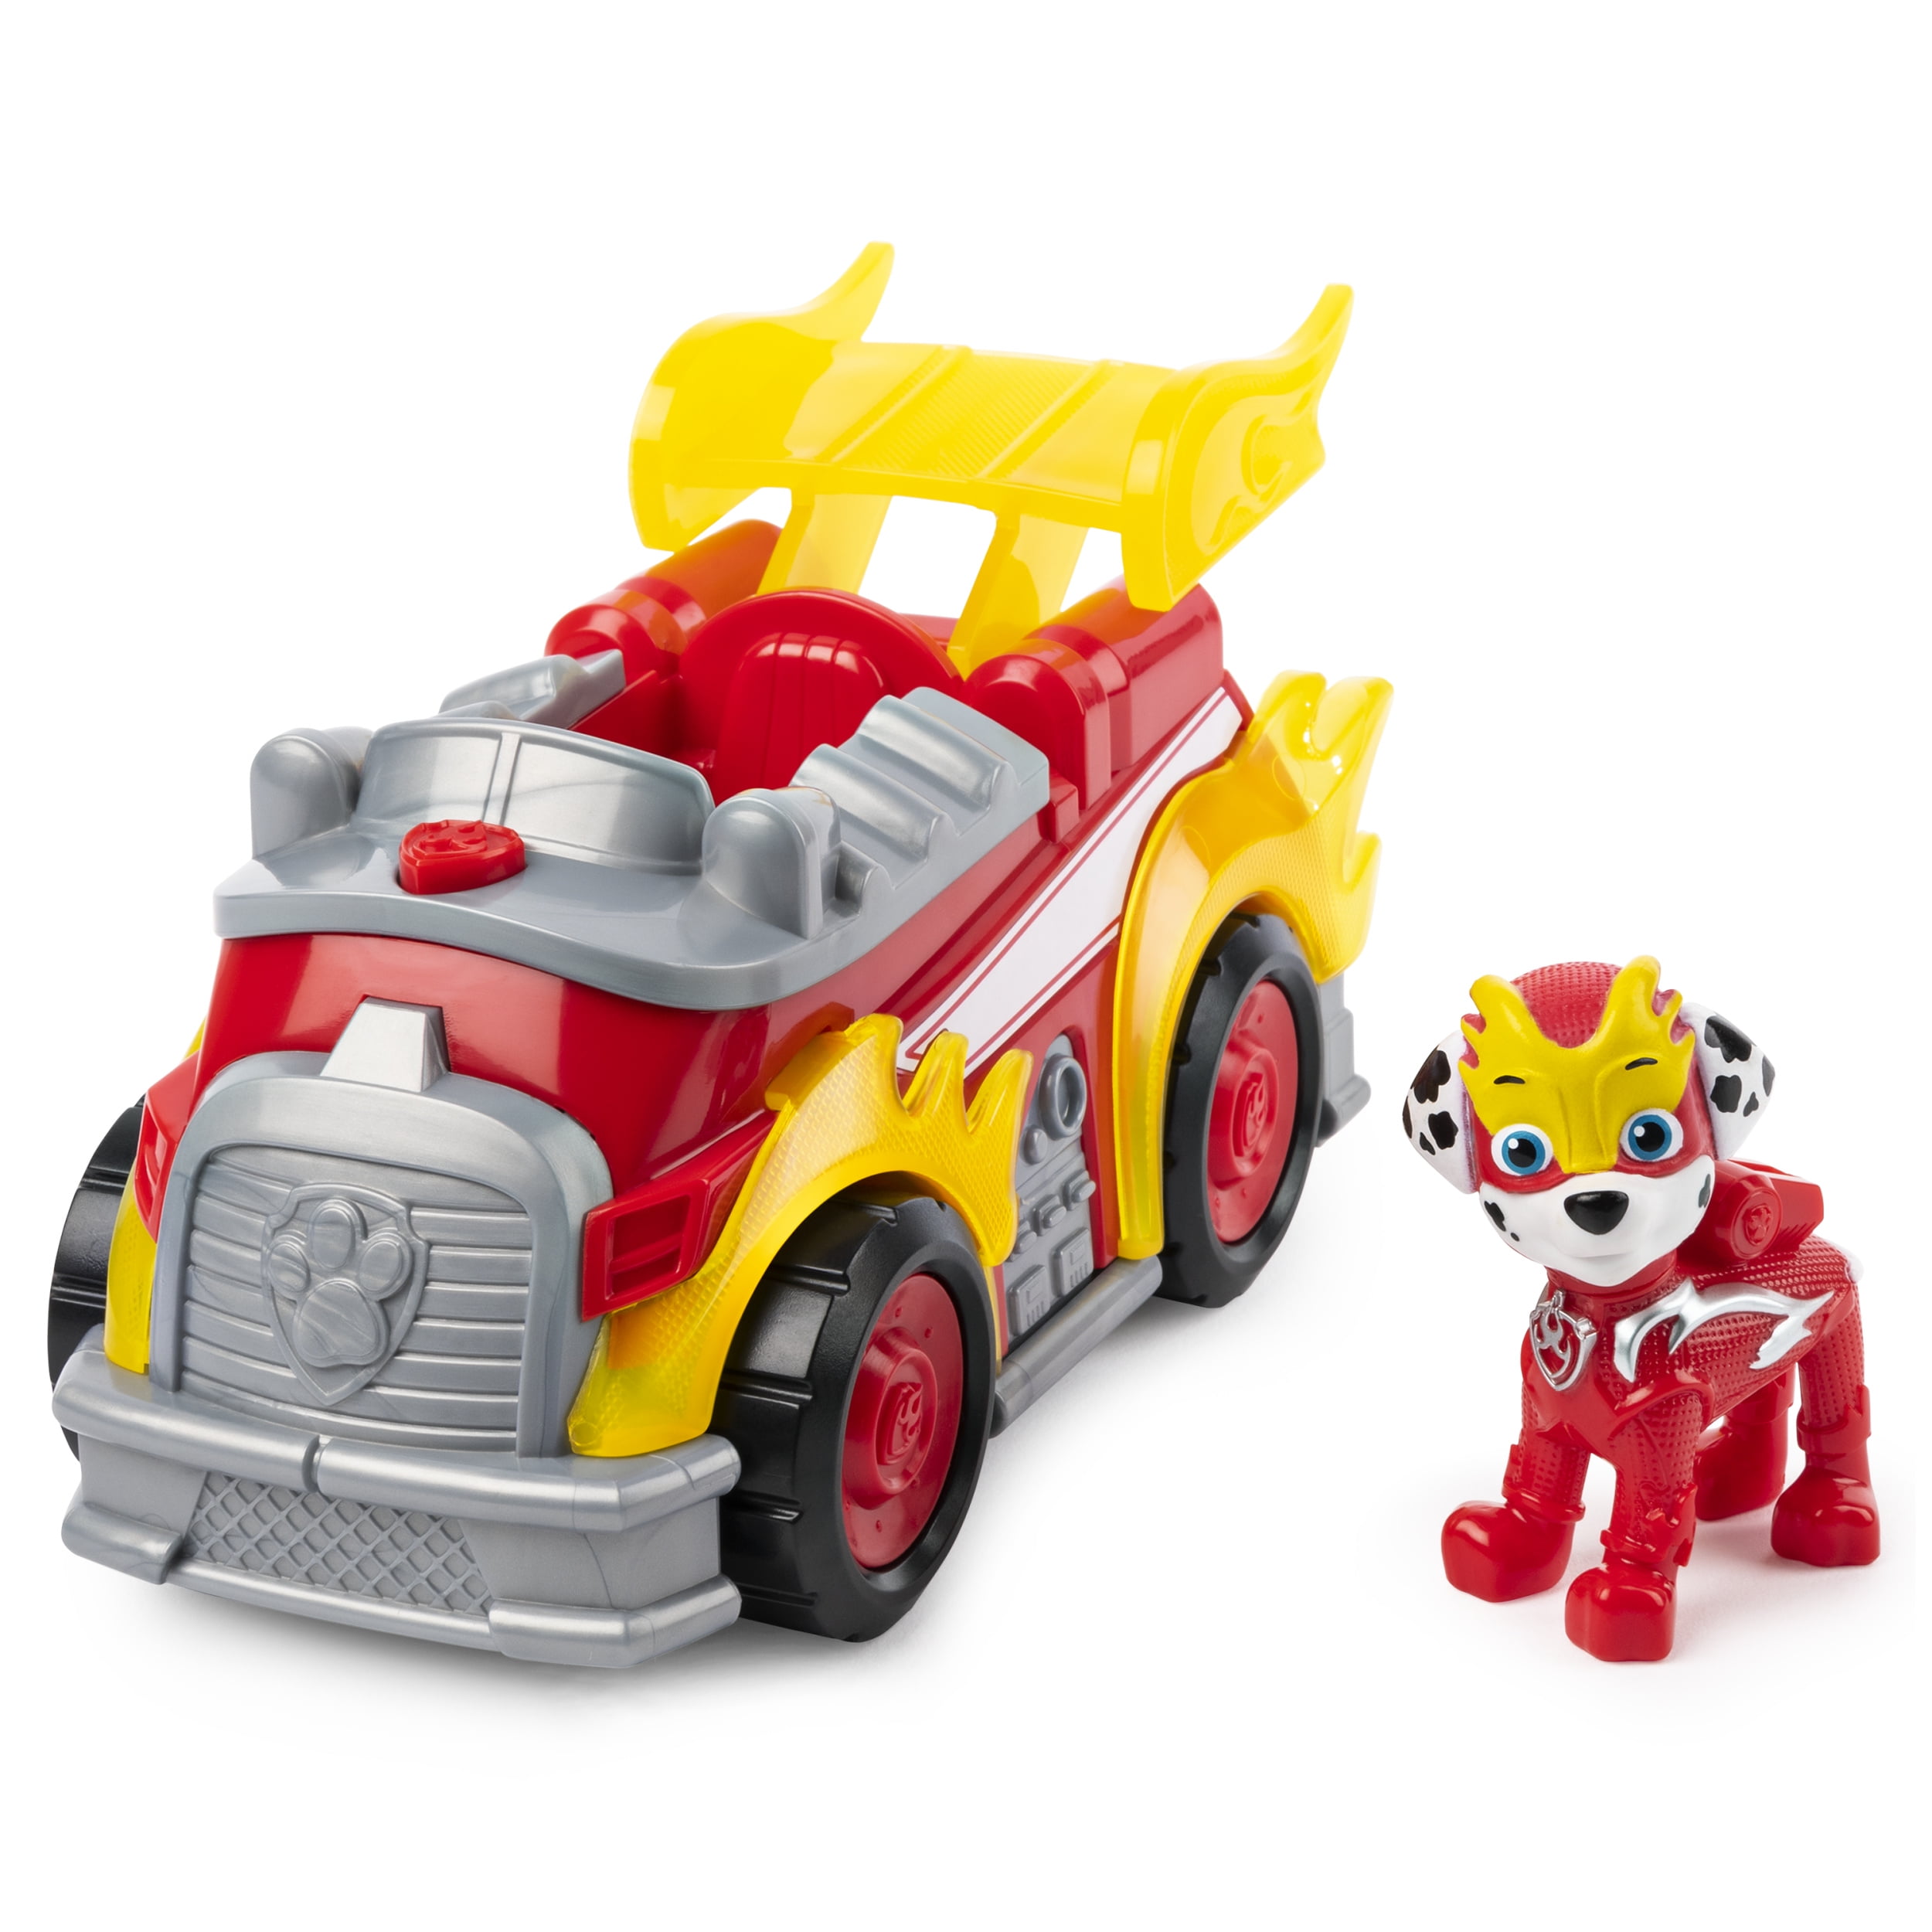 Rocky Paw Patrol Mighty Pups Super Paws Marshall Skye Rubble Chase Figure 